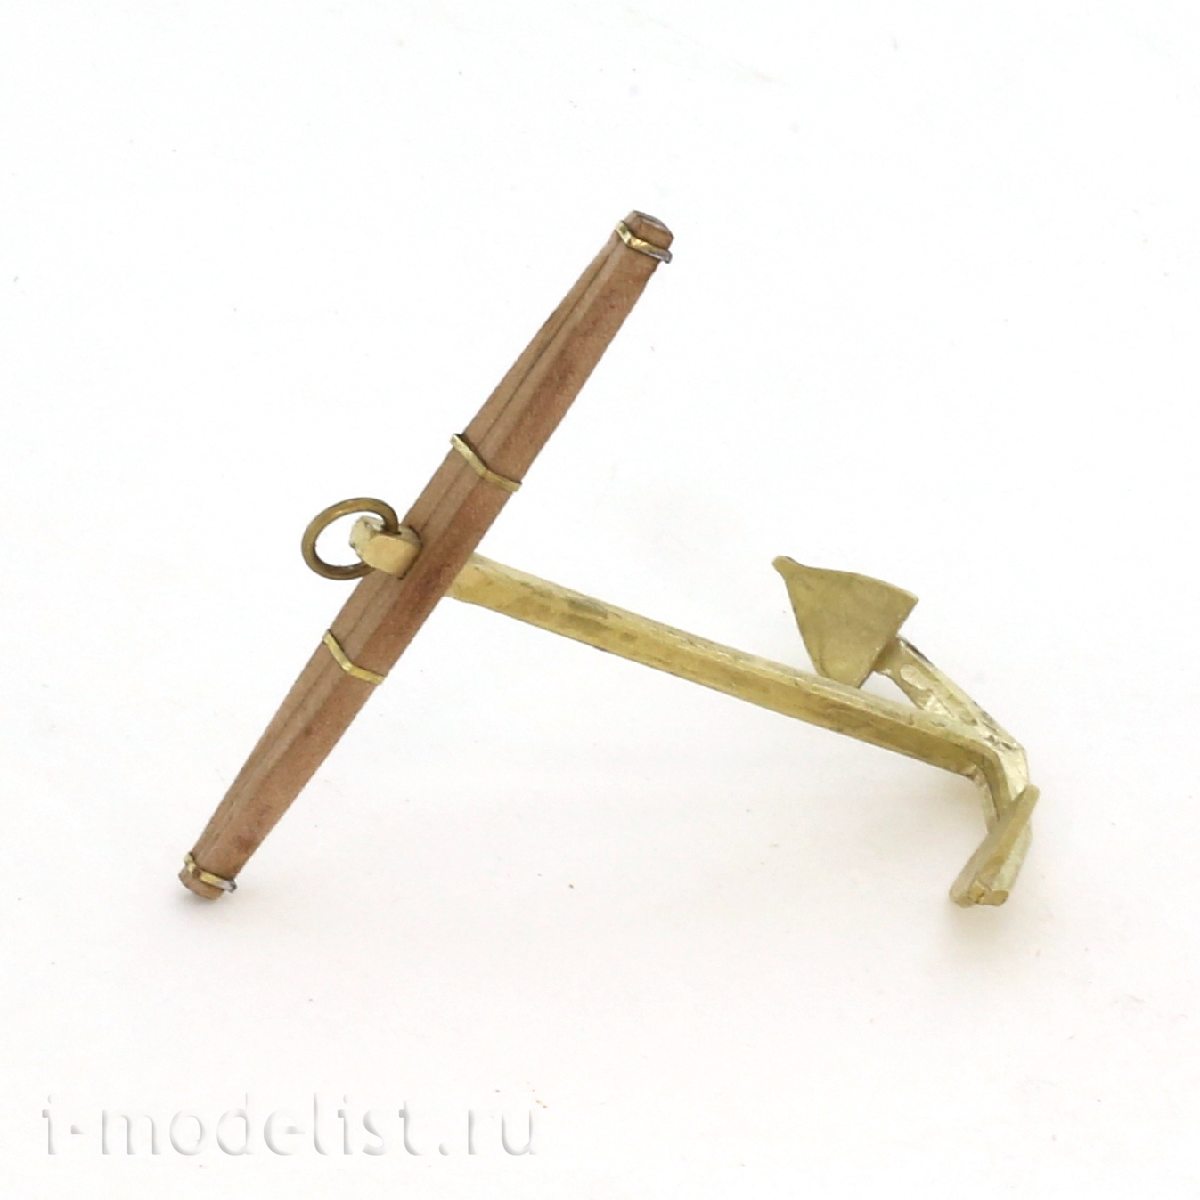 EV350030 Squadron 1/350 Admiralty anchor 60 mm with wooden rod (2 pcs.)